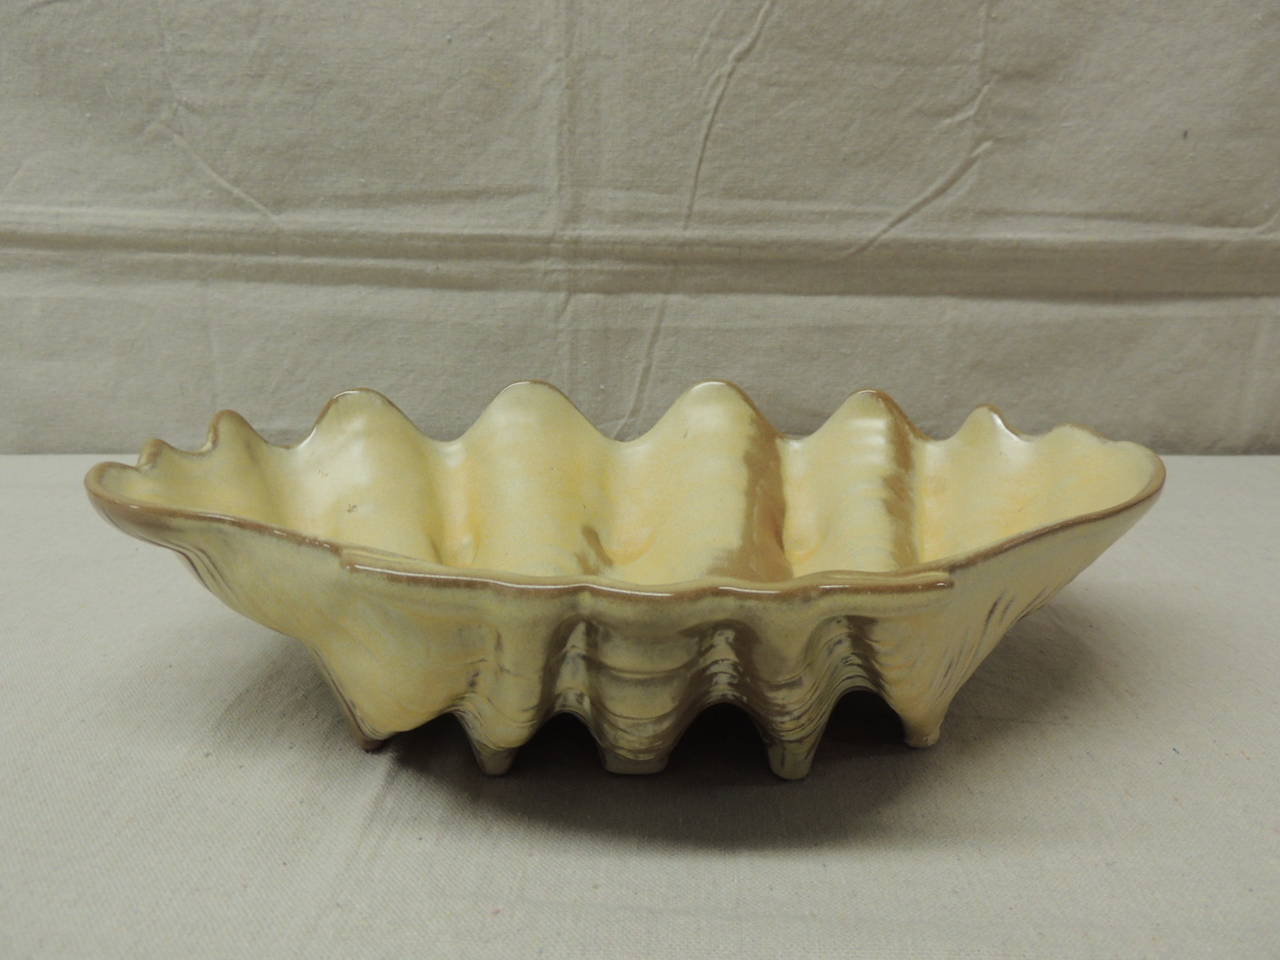 Hand-Crafted Ceramic Clam Shell Decorative Serving Dish